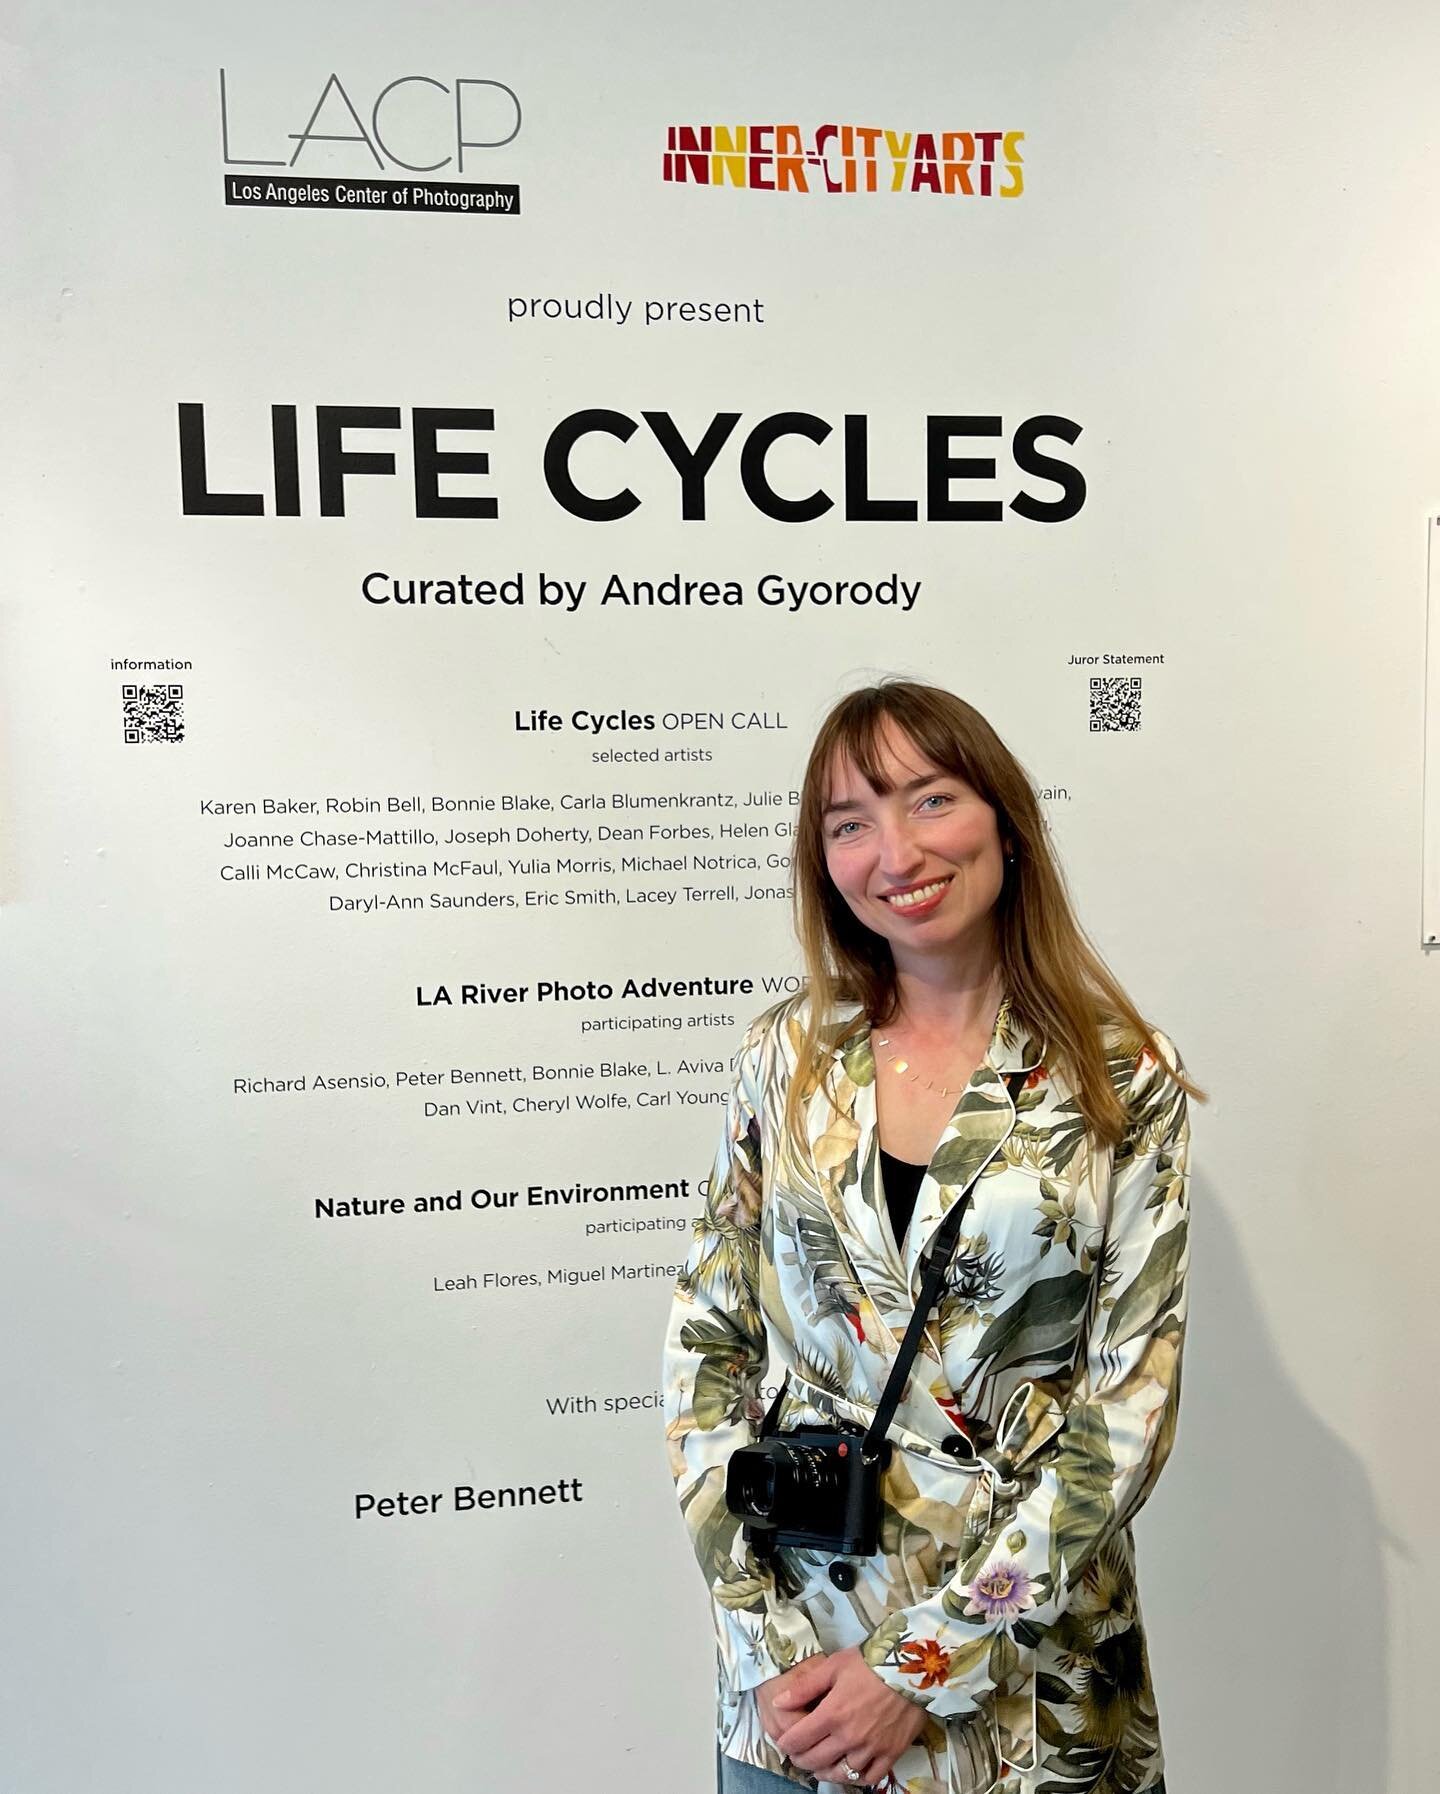 Life Cycles Exhibition Opening @innercityarts @la_centerofphoto 

Thanks everyone for coming and for the interest of some who live abroad and asked to share the images :)

I was delighted to see everyone and hear that many kids and adults loved the b